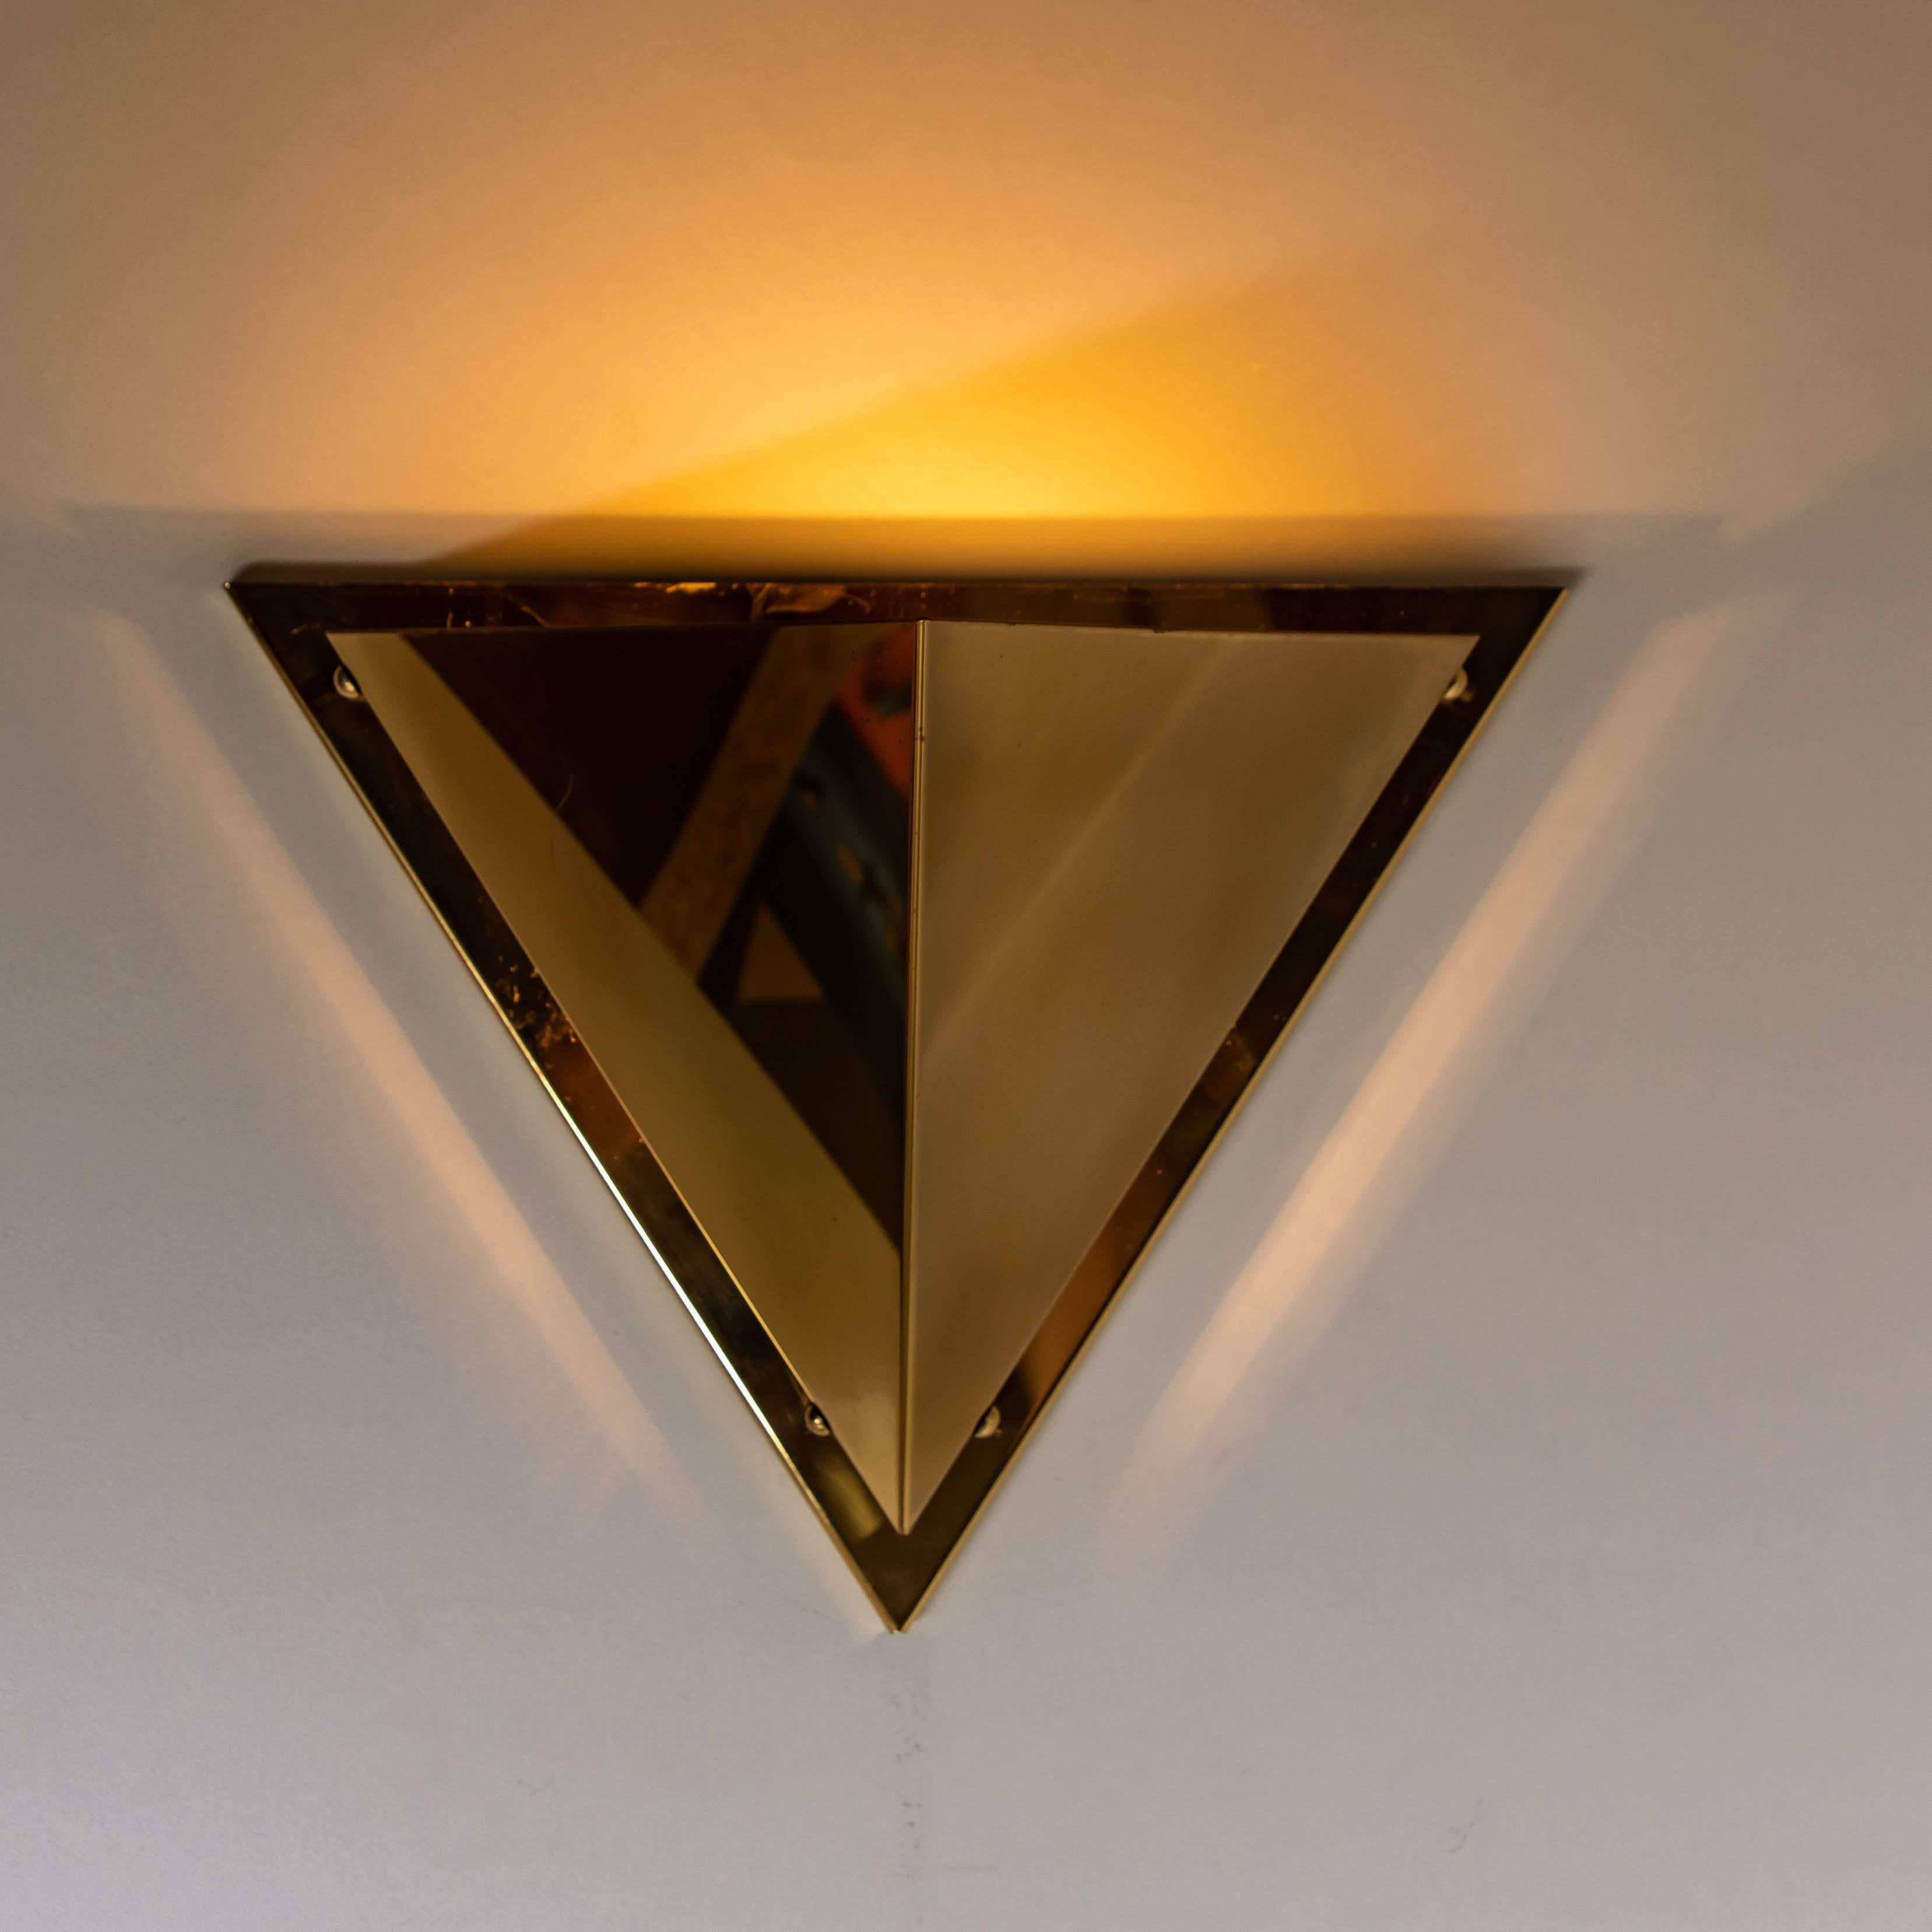 One of the five pyramid shaped brass wall lamps, 1970. Each wall light consist brass shades, which are held with brass screws on a brass frame. The wall light creates beautiful warm light partition upwards and on the side of the wall.

Please